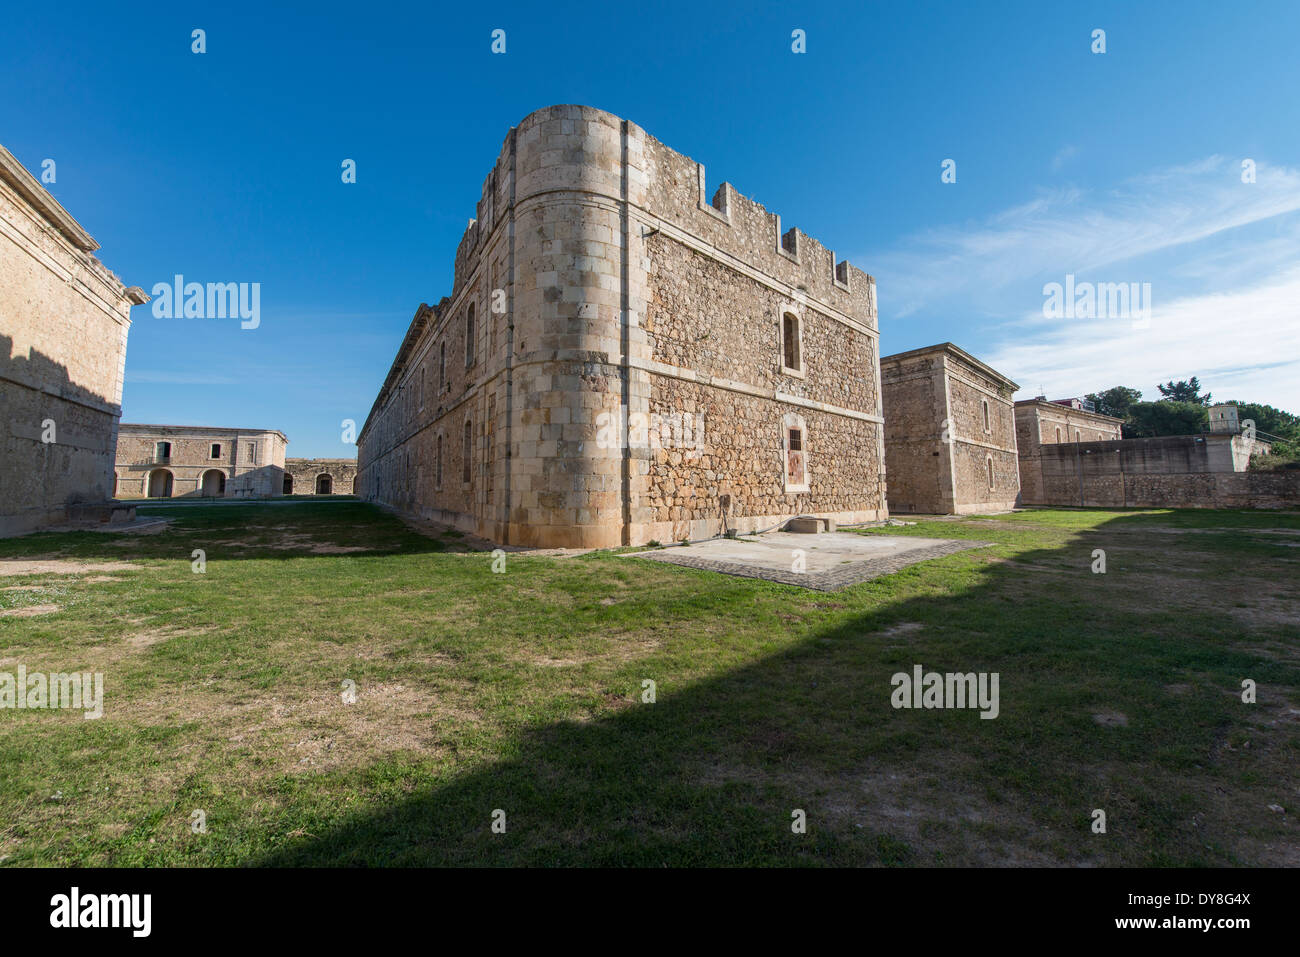 Military fortified castle of Sant Ferran, Figueres, Spain Stock Photo